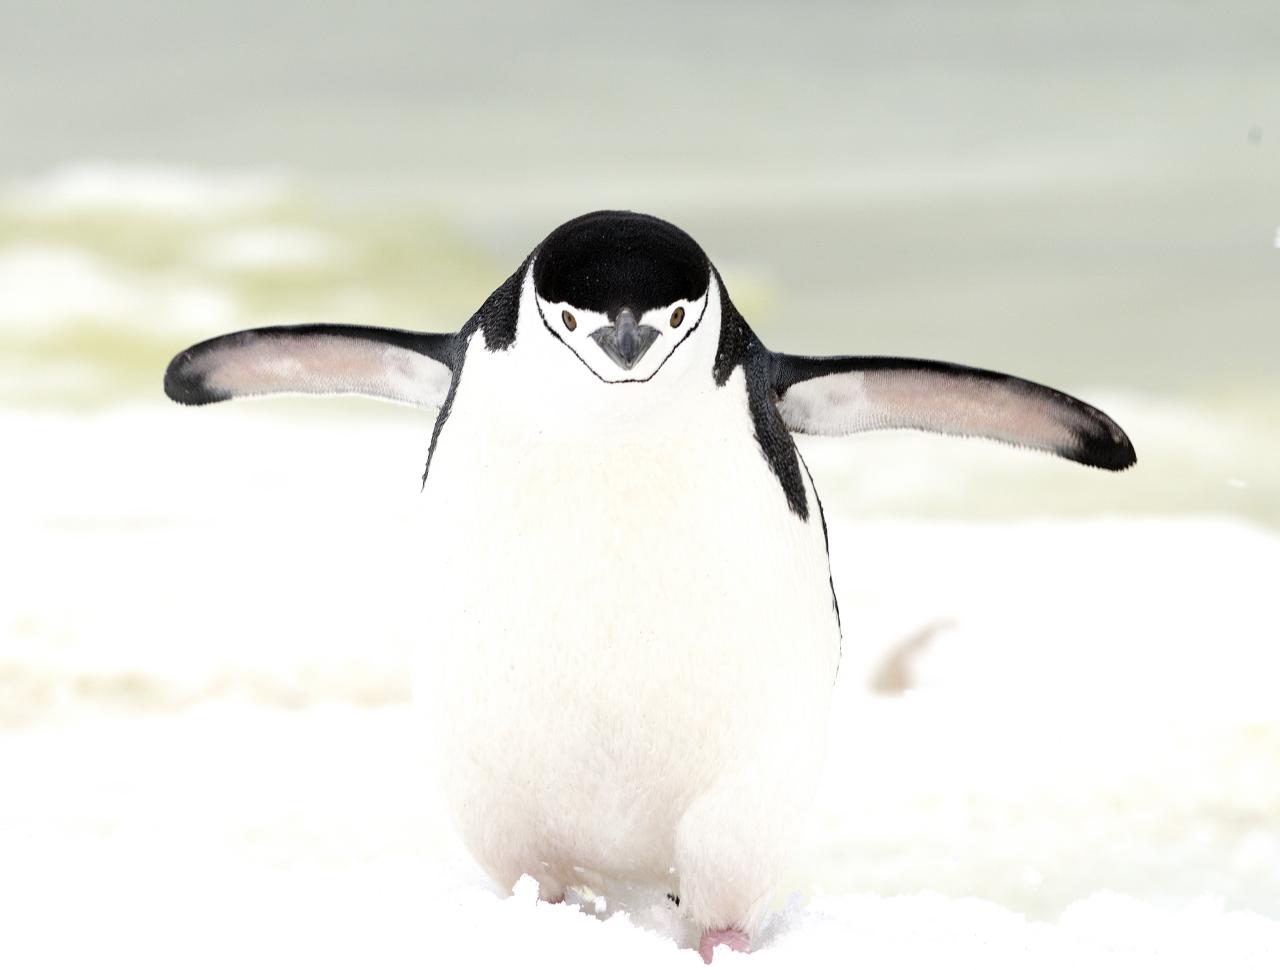 a small penguin stands in the snow on a beach